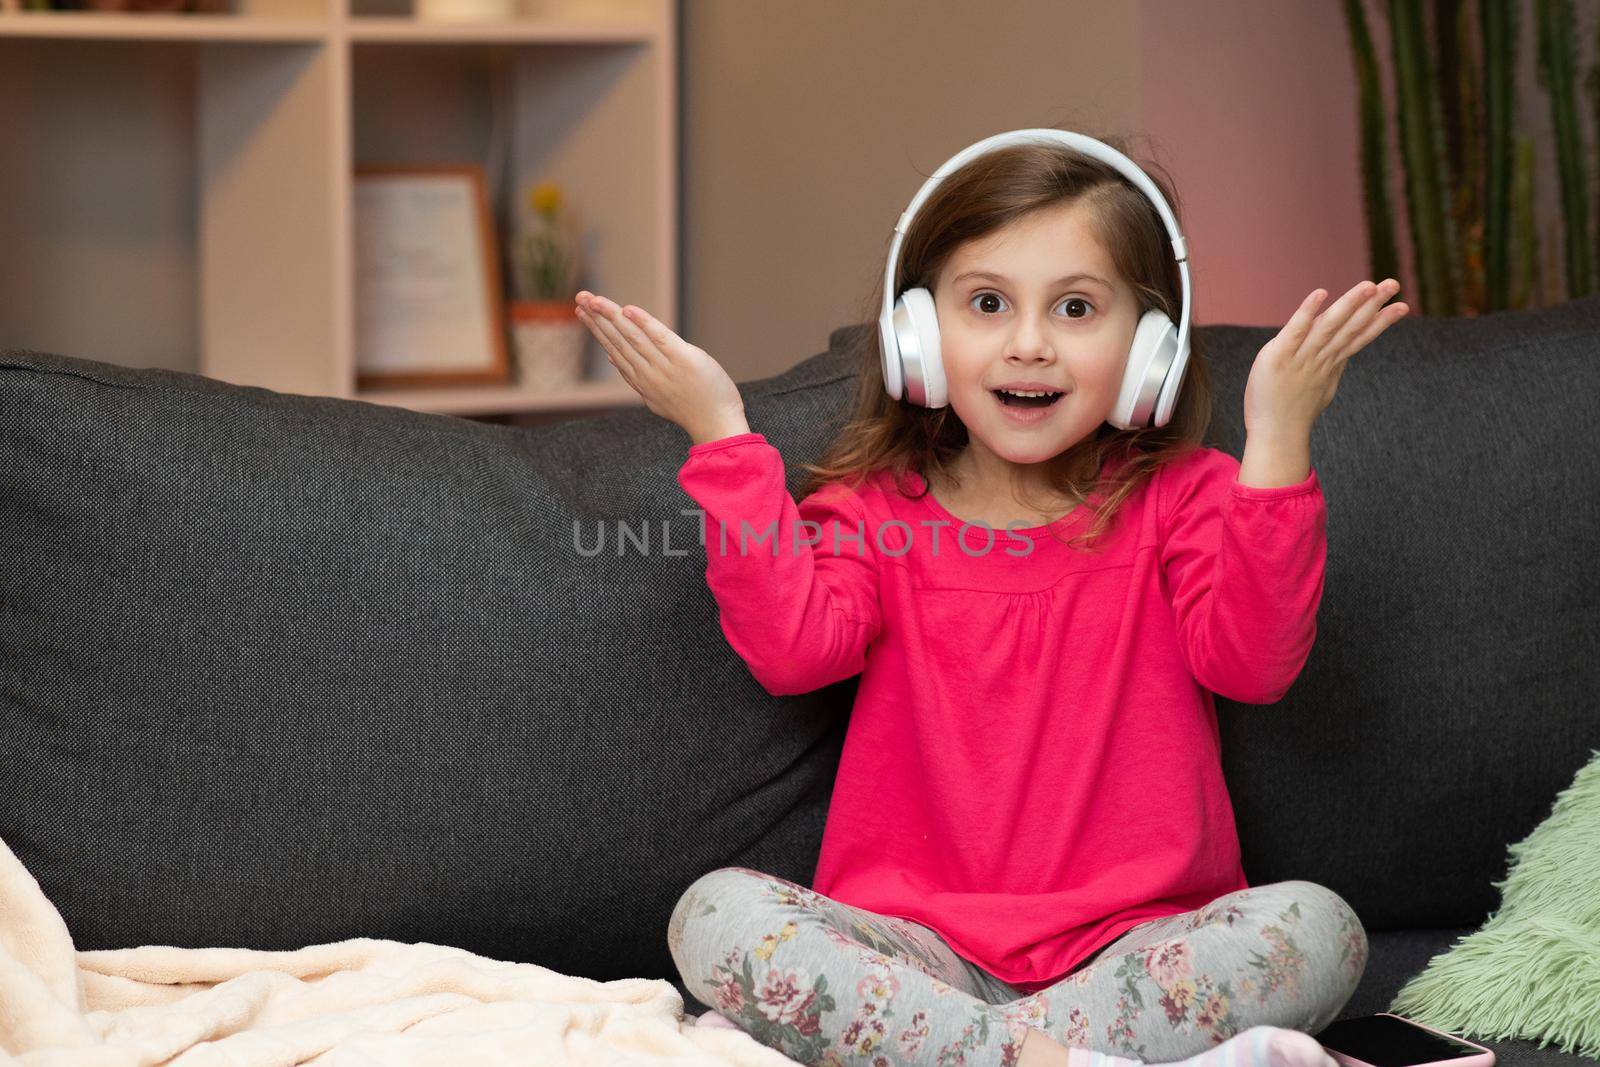 Cute Happy Little Girl Listens To Music On Wireless Headphones. Funny Little Girl Dancing, Singing And Moving To Rhythm. Kid Wearing Headphones.